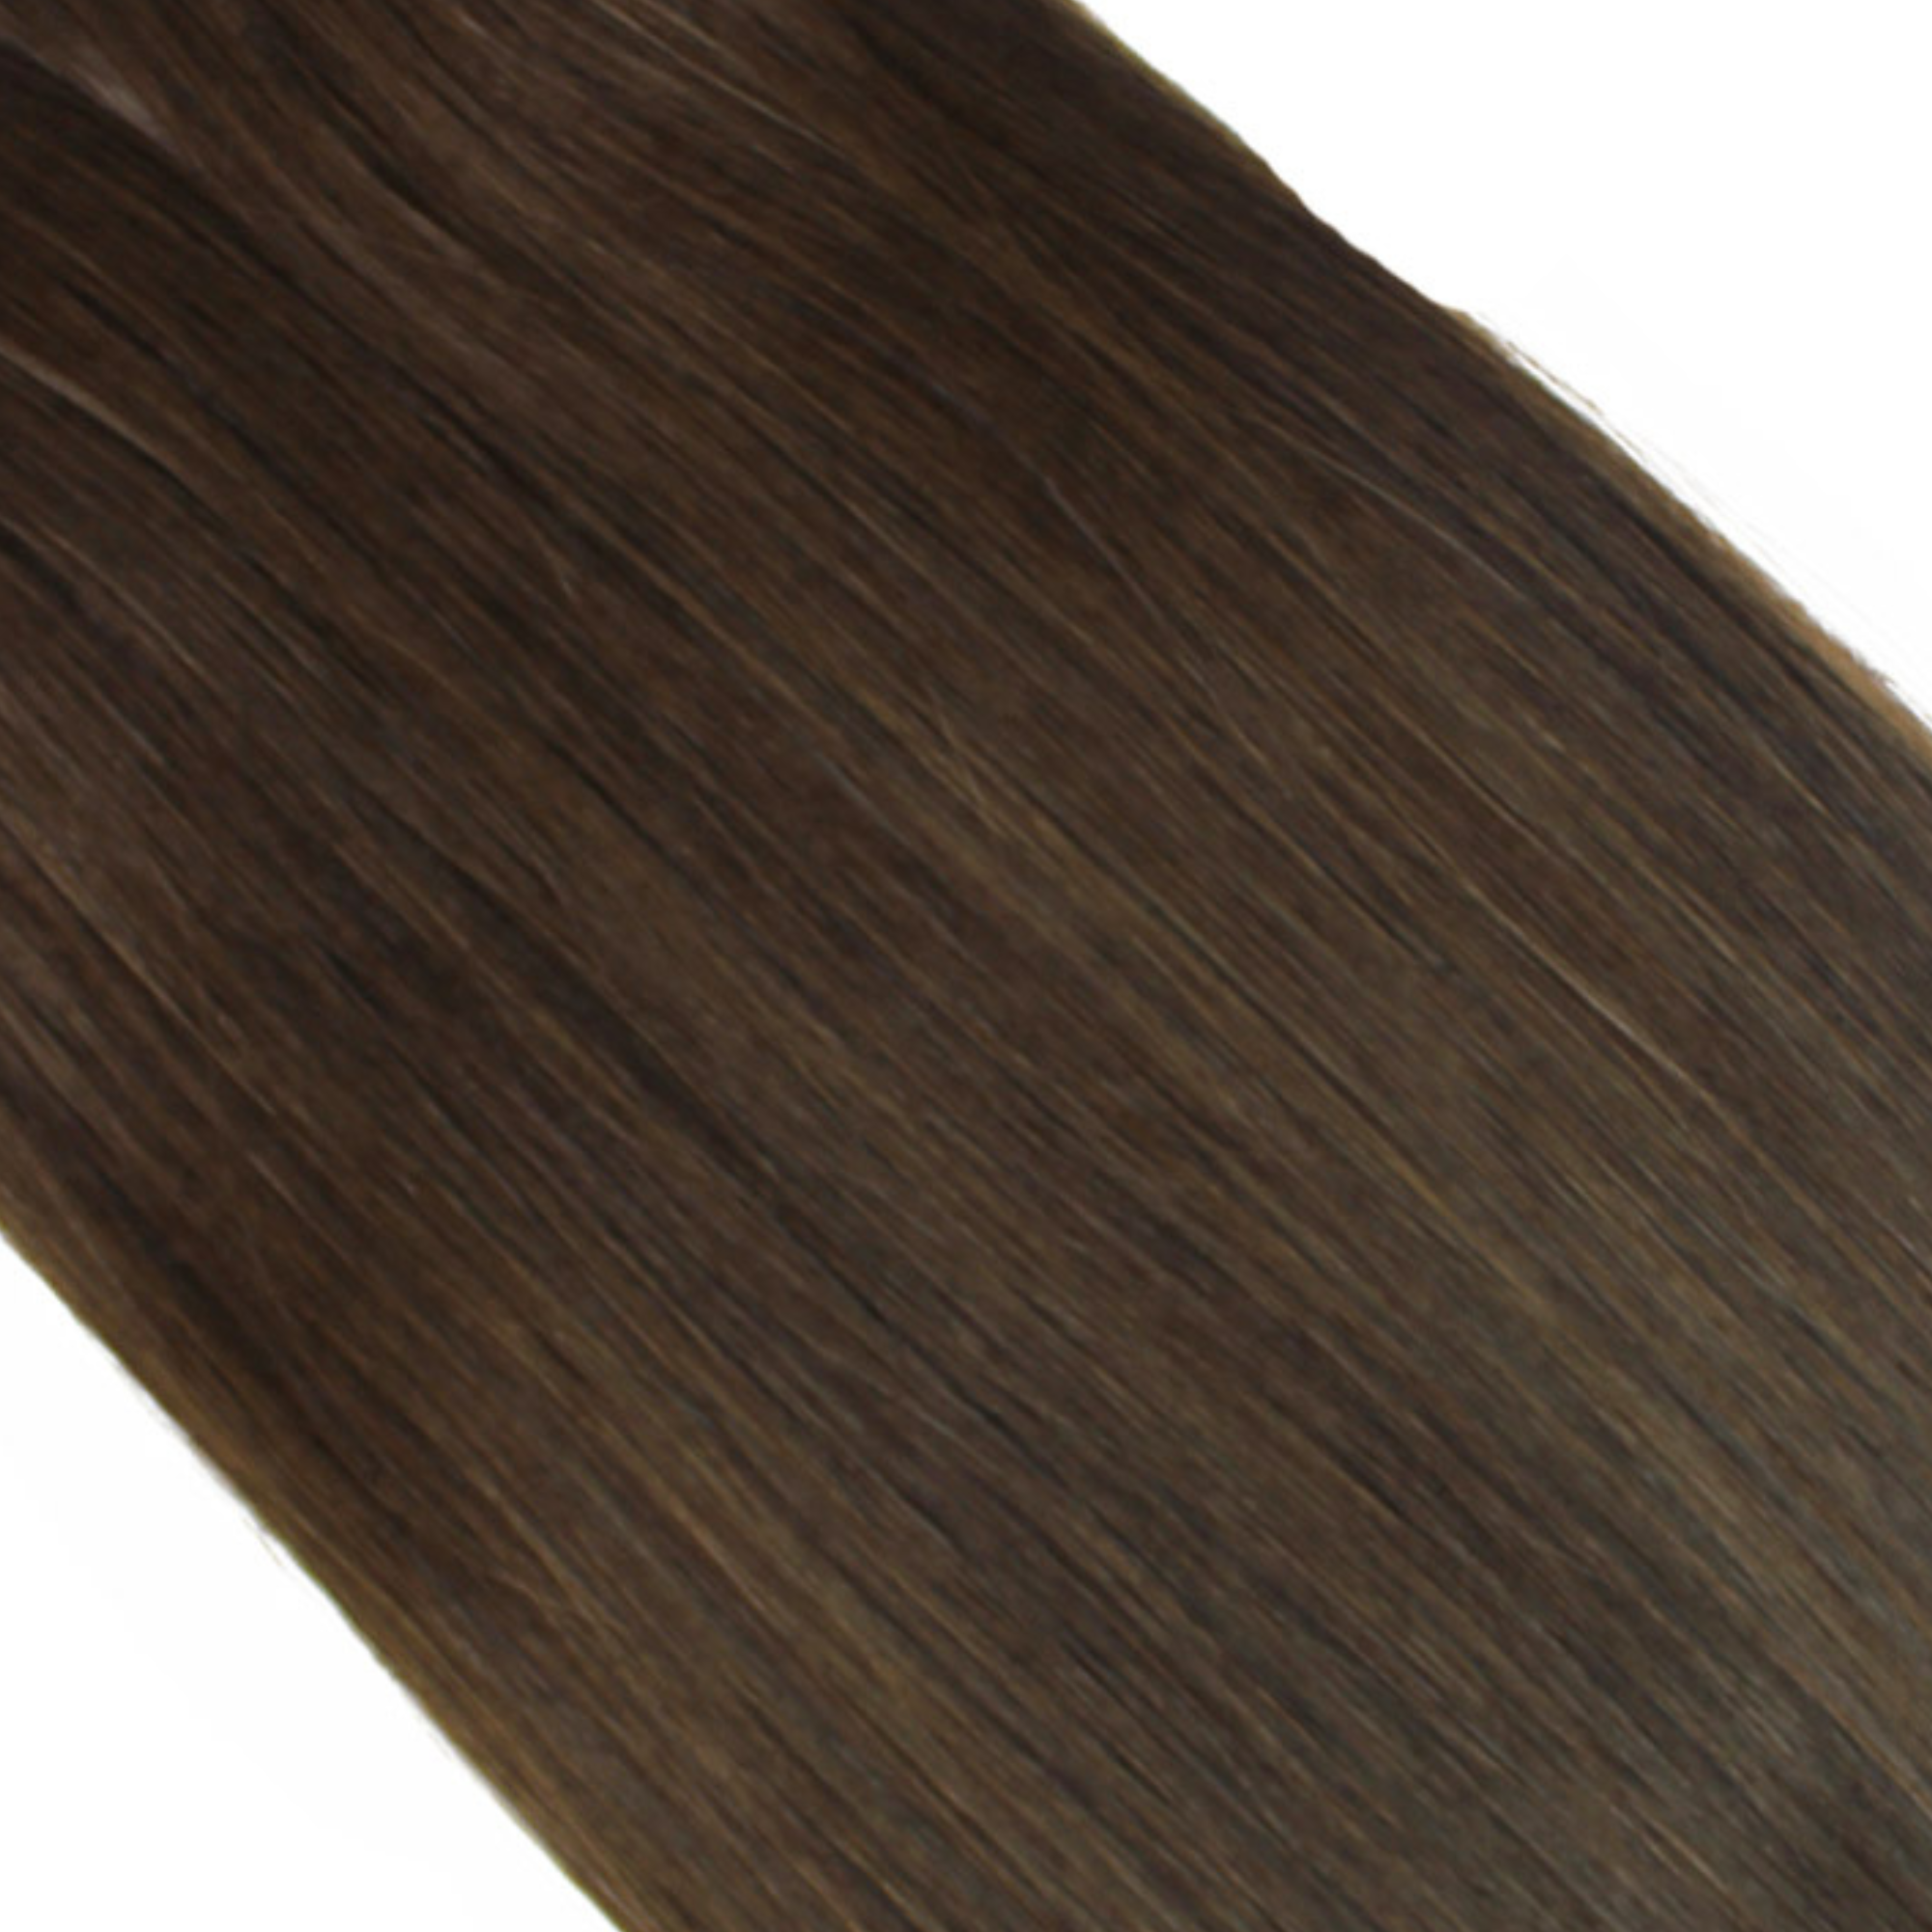 "hair rehab london 22" tape hair extensions shade swatch titled paparazzi perfect"